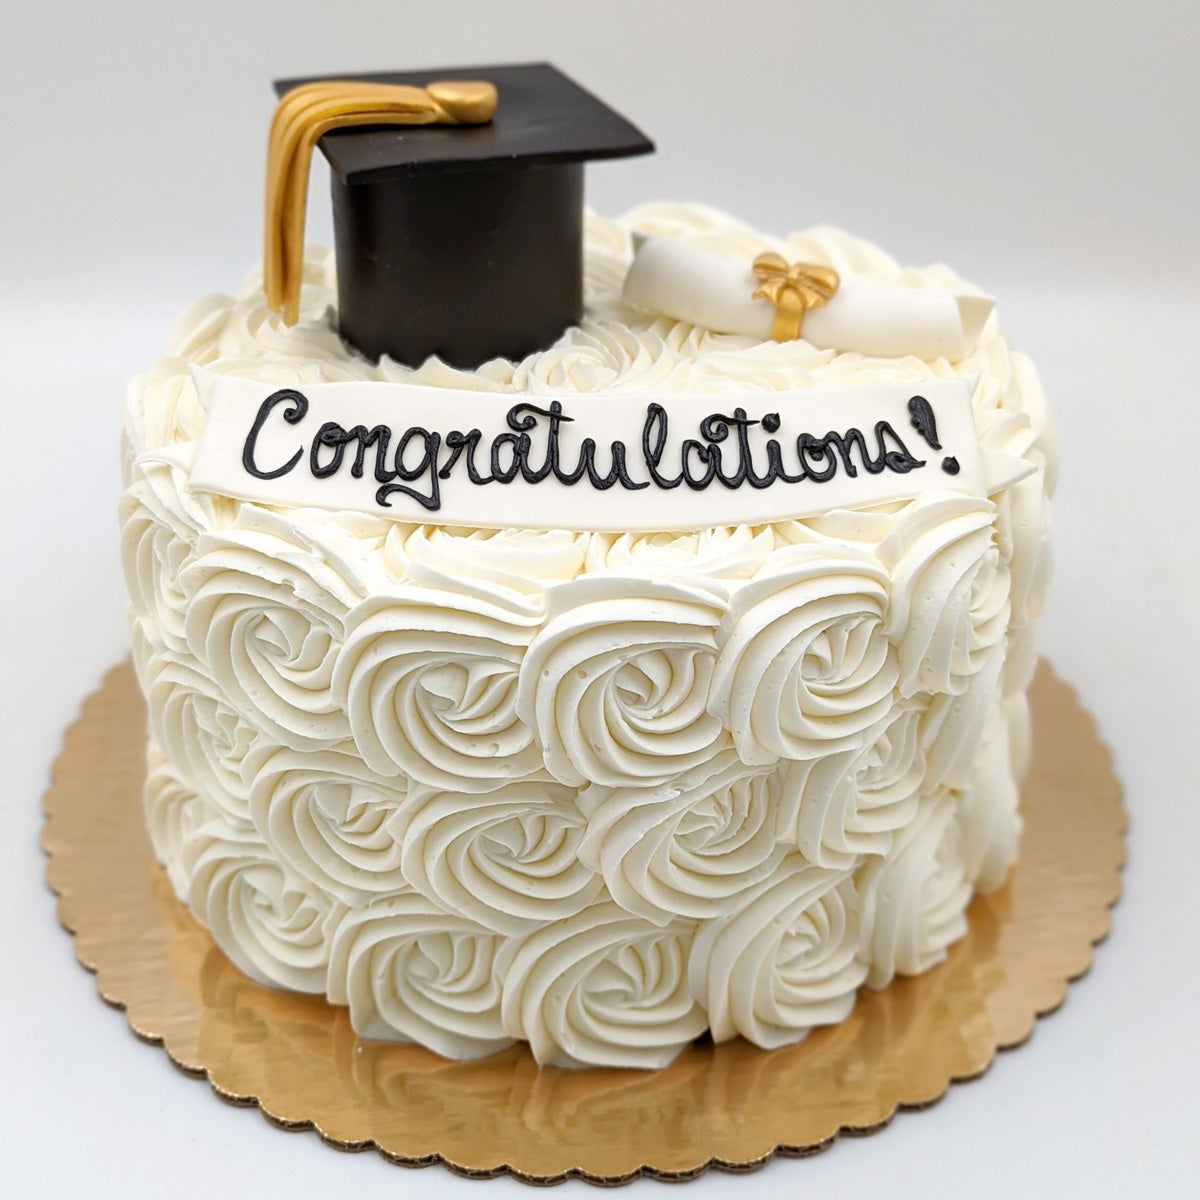 55+ Cute Cake Ideas For Your Next Party : Full Blooms Graduation Cake